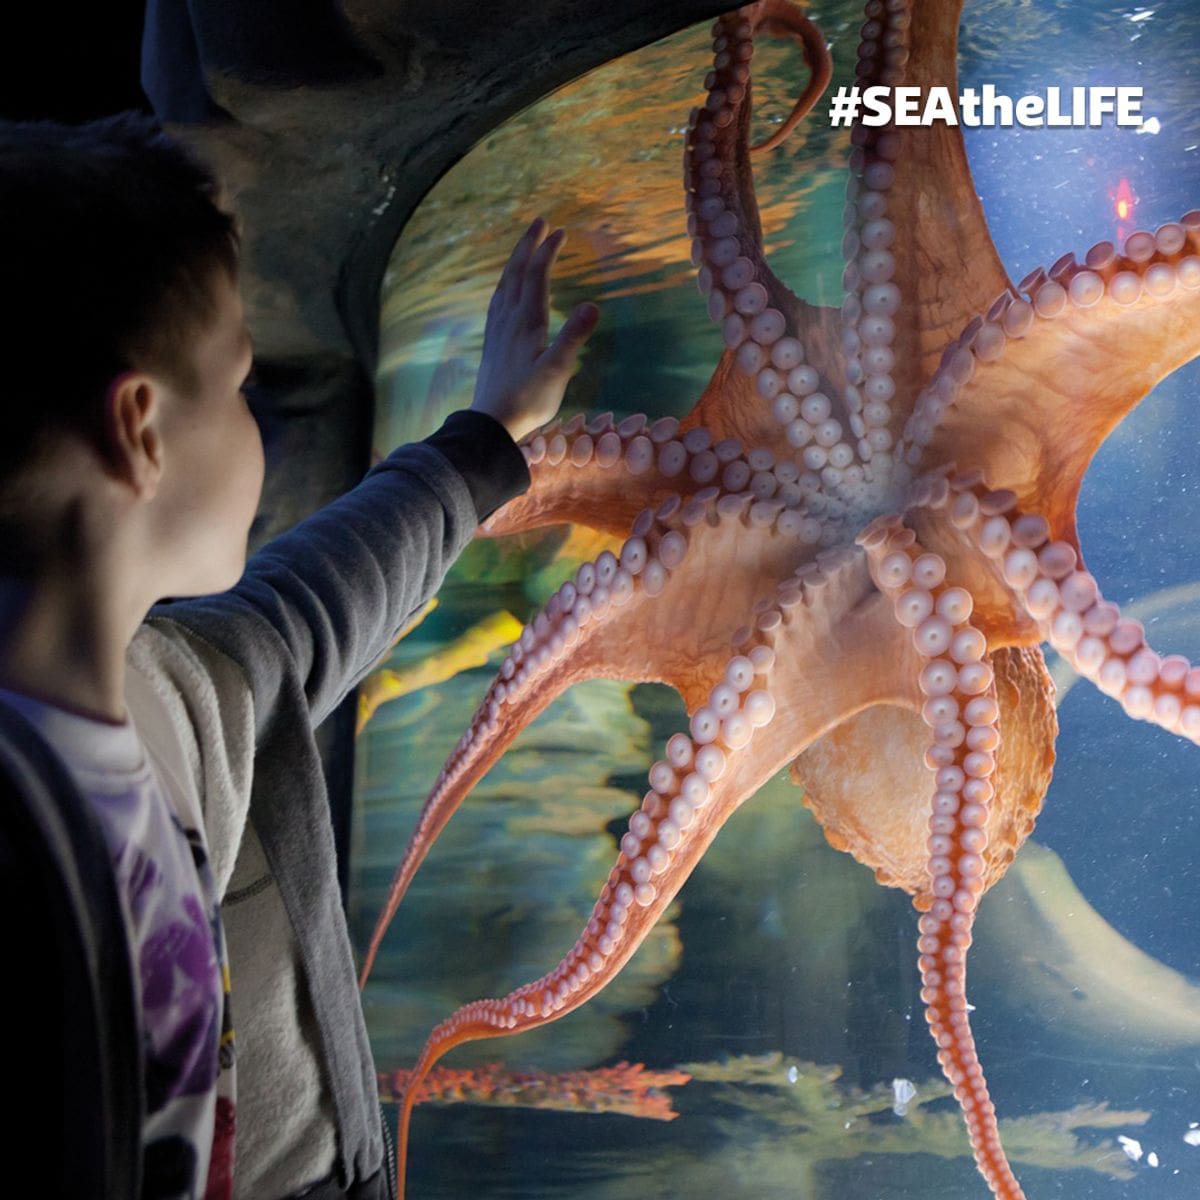 A young boy reaches out to touch the glass of an aquarium holding an octopus at SEA LIFE Porto, a must stop on our 1-Week Porto itinerary with toddlers.